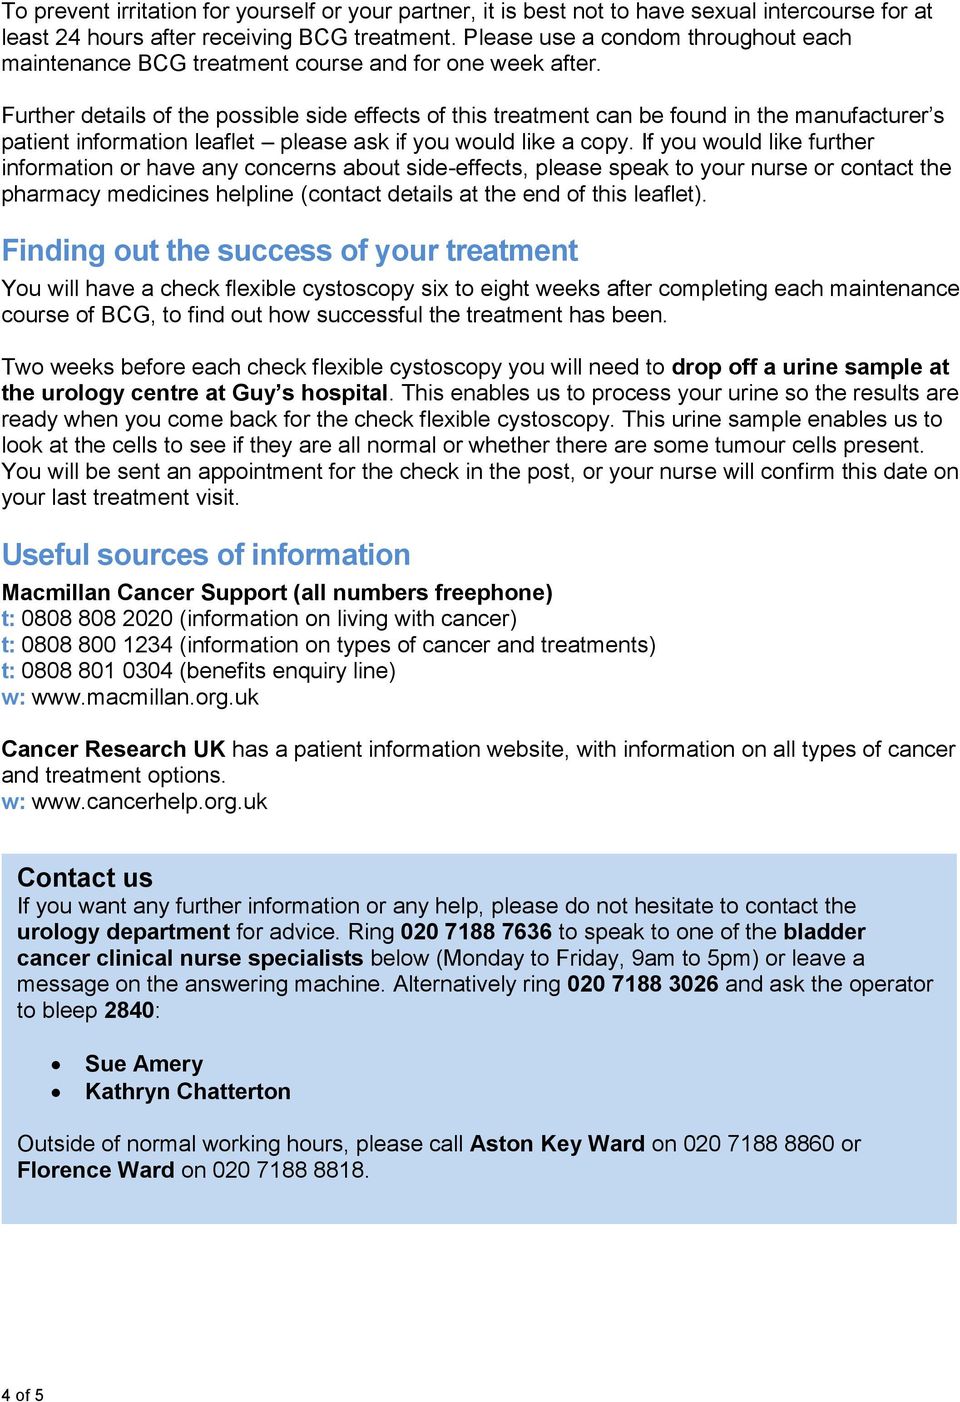 Further details of the possible side effects of this treatment can be found in the manufacturer s patient information leaflet please ask if you would like a copy.